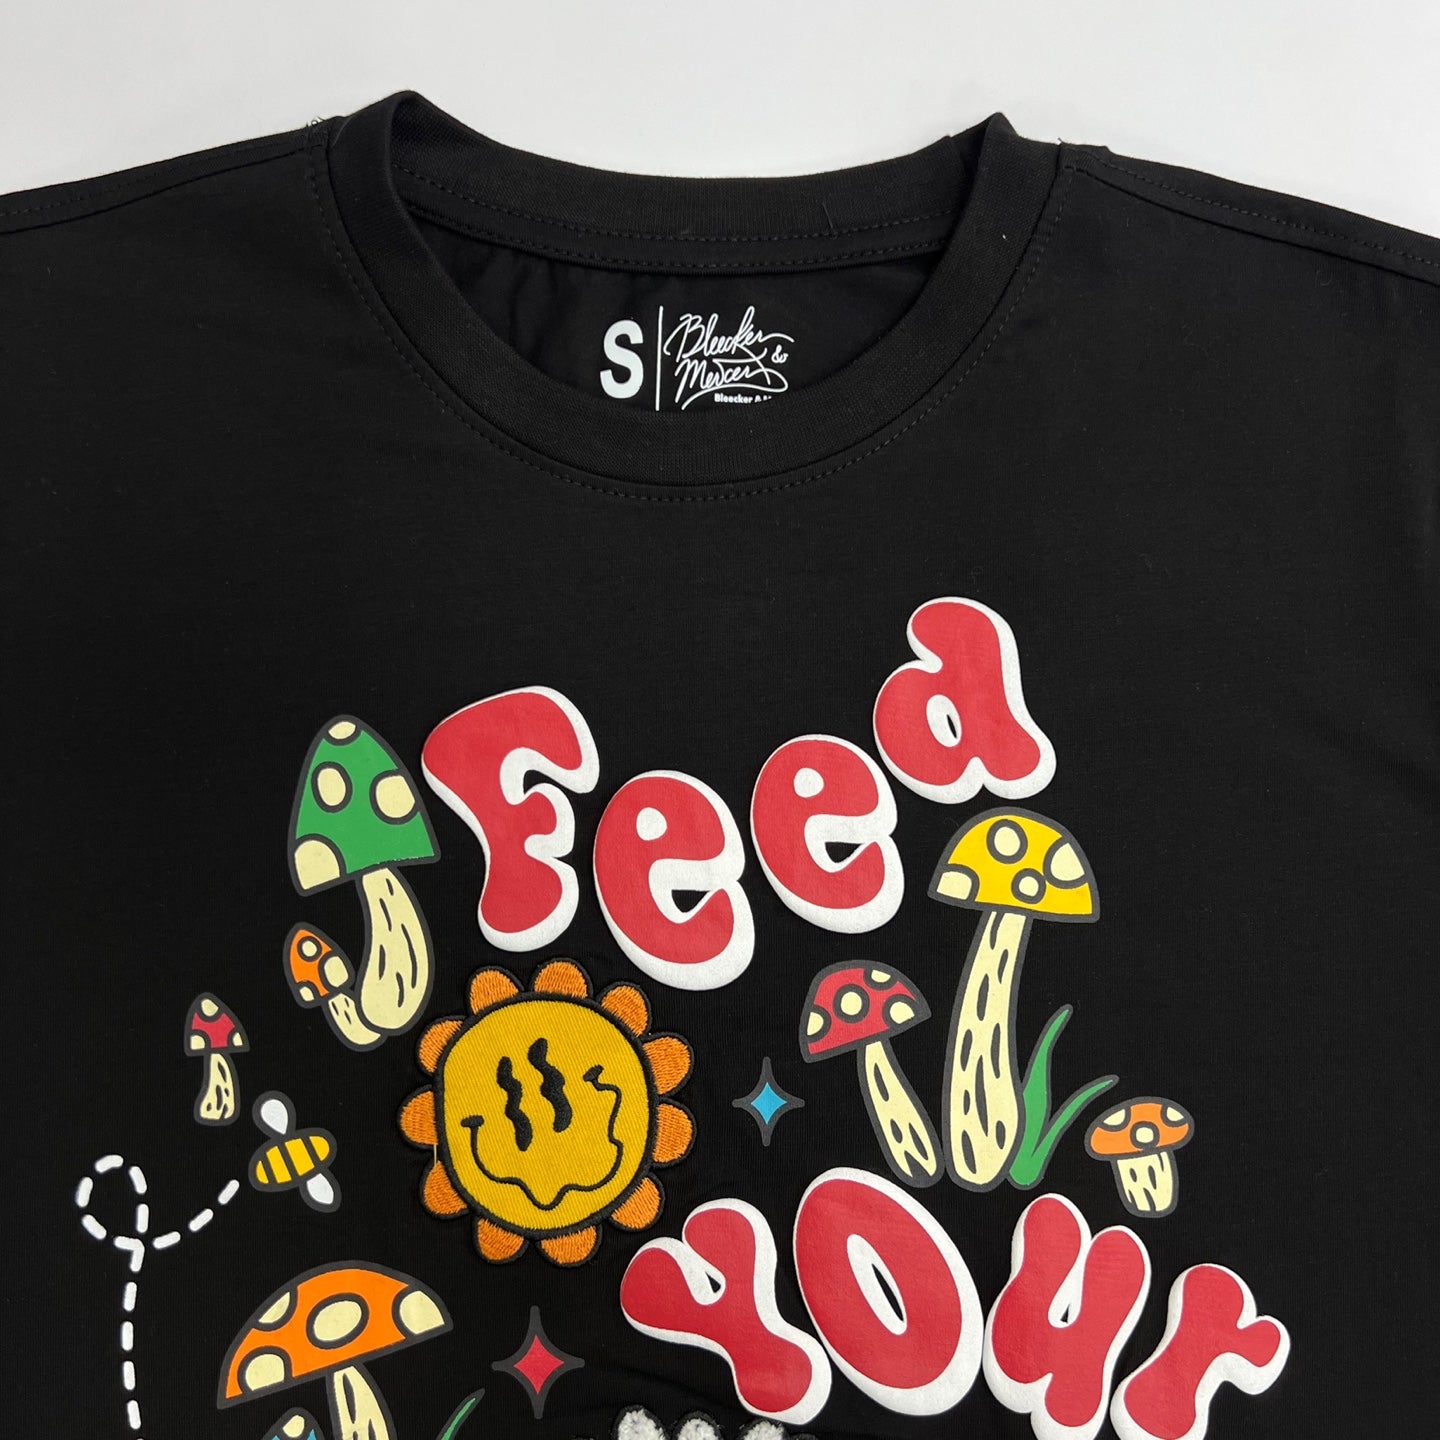 BLEECKER & MERCER Feed Your Mind Graphic T-Shirt